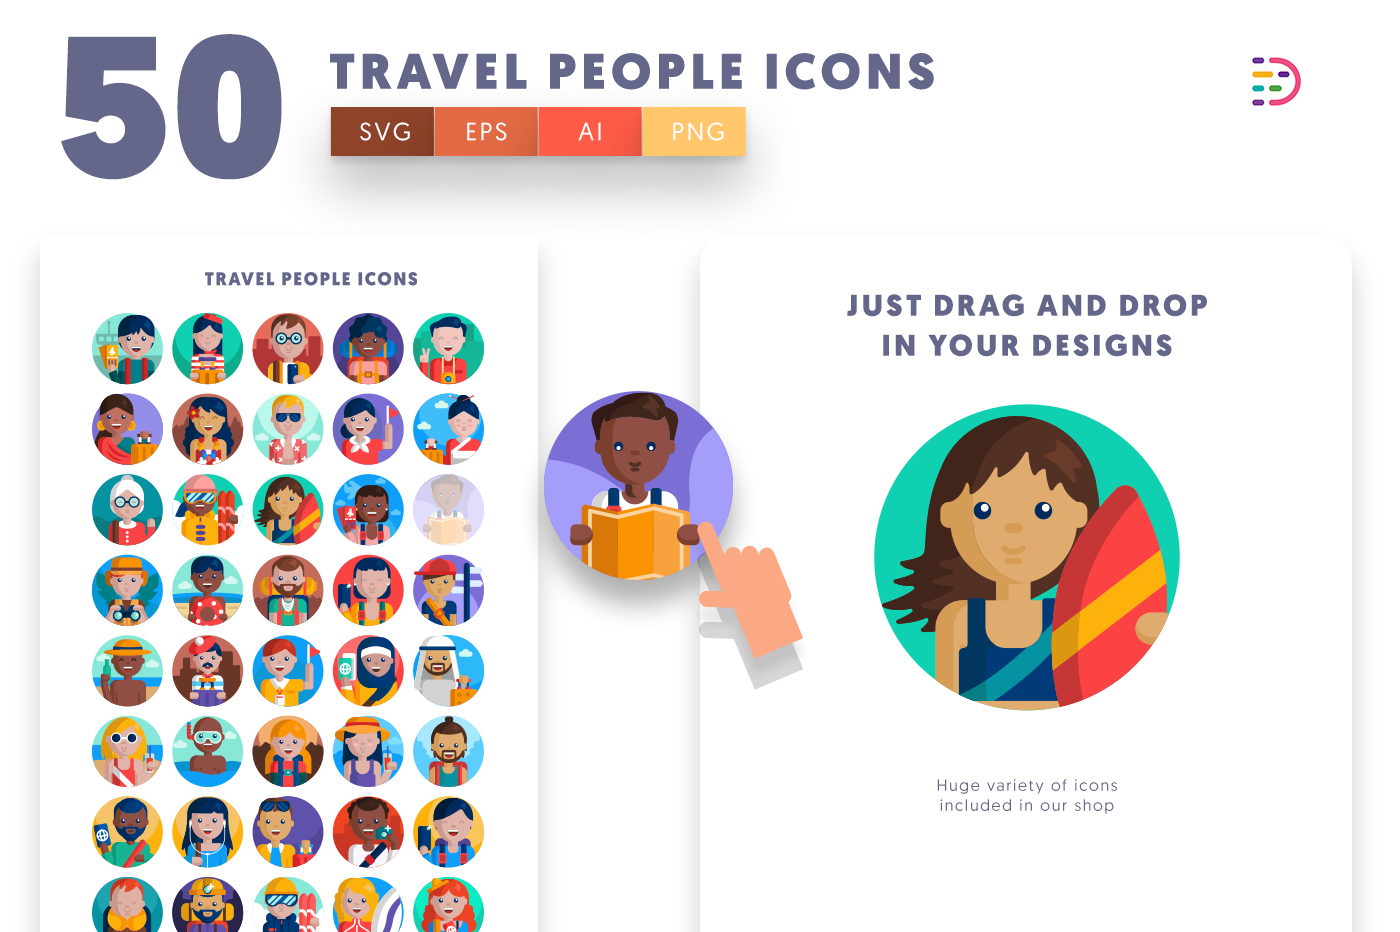 50 Travel People Icons with colored backgrounds